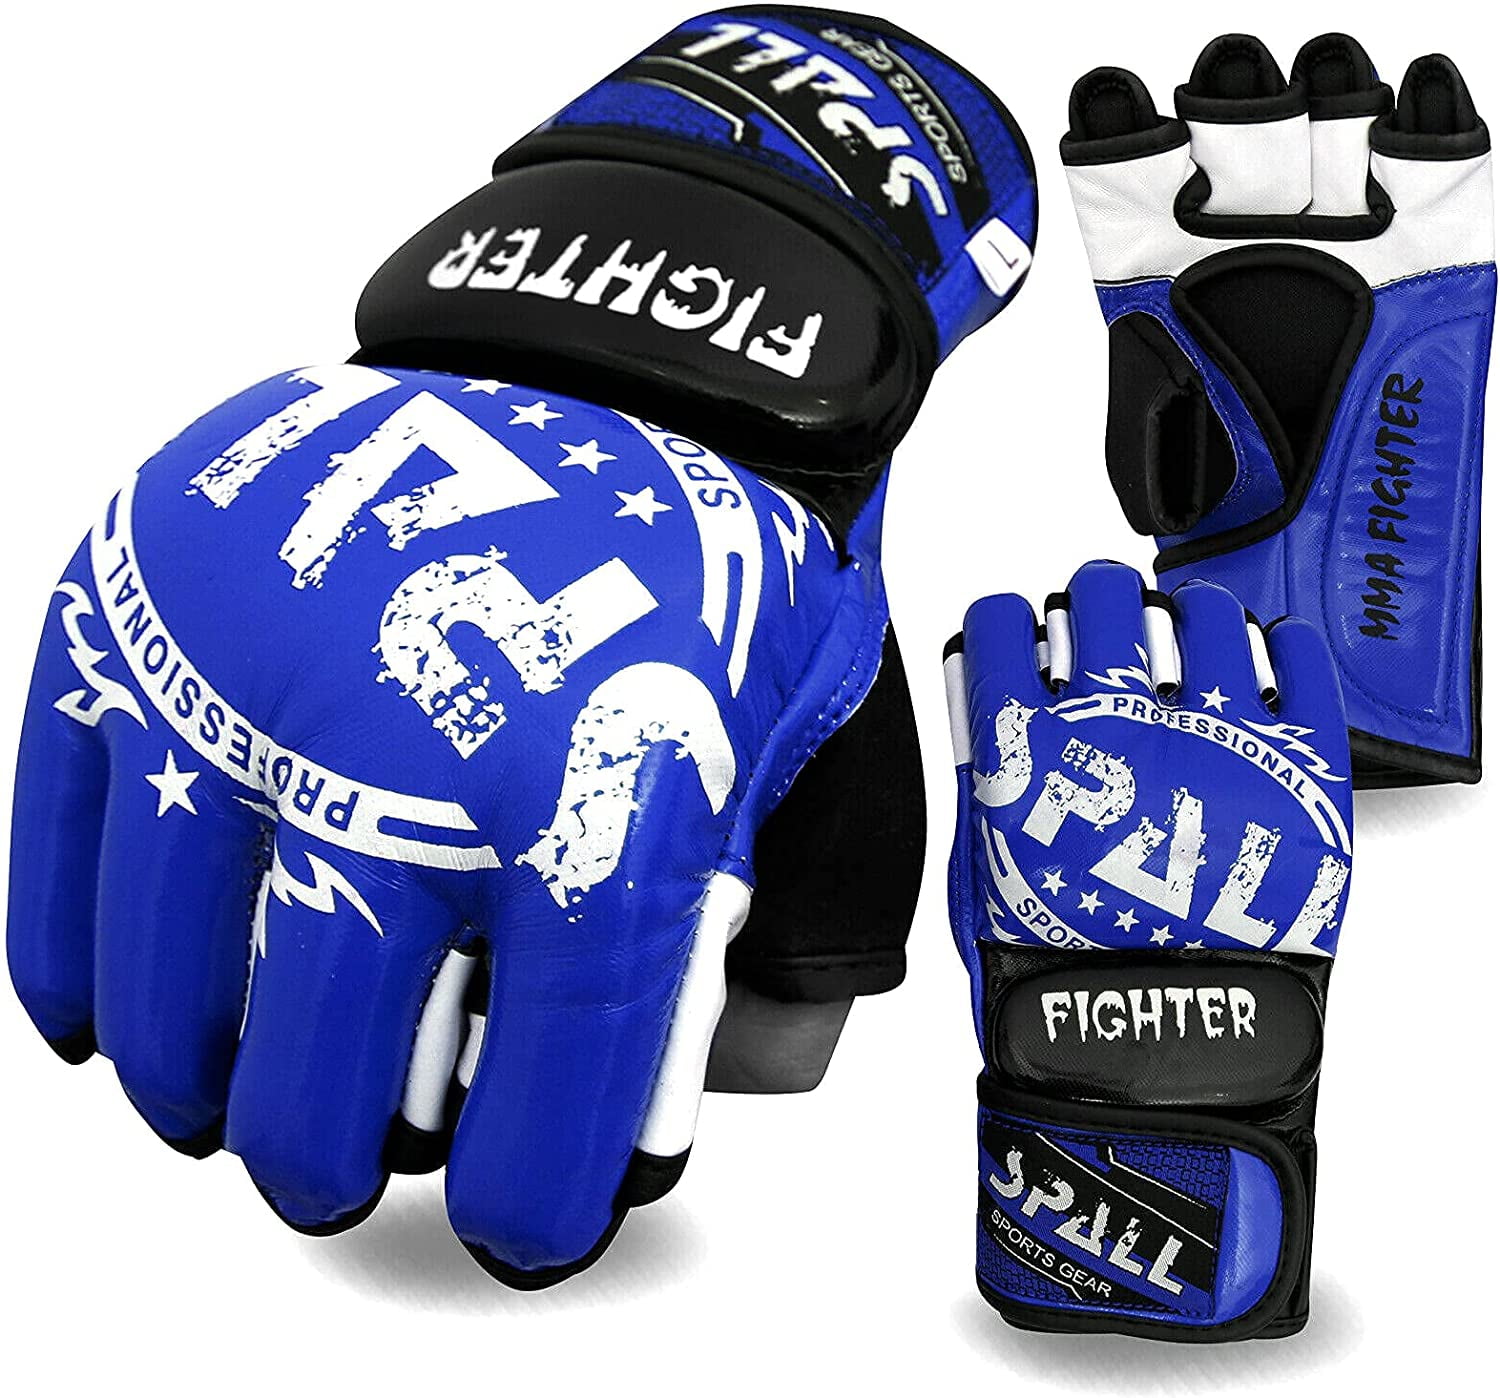 Gloves Large) Martial Boxing Finger UFC, Gloves, Boxing Spall (Blue, Adjustable Half - for Training Gloves Band Pro Arts Gloves Grappling Unisex MMA and for Wrist